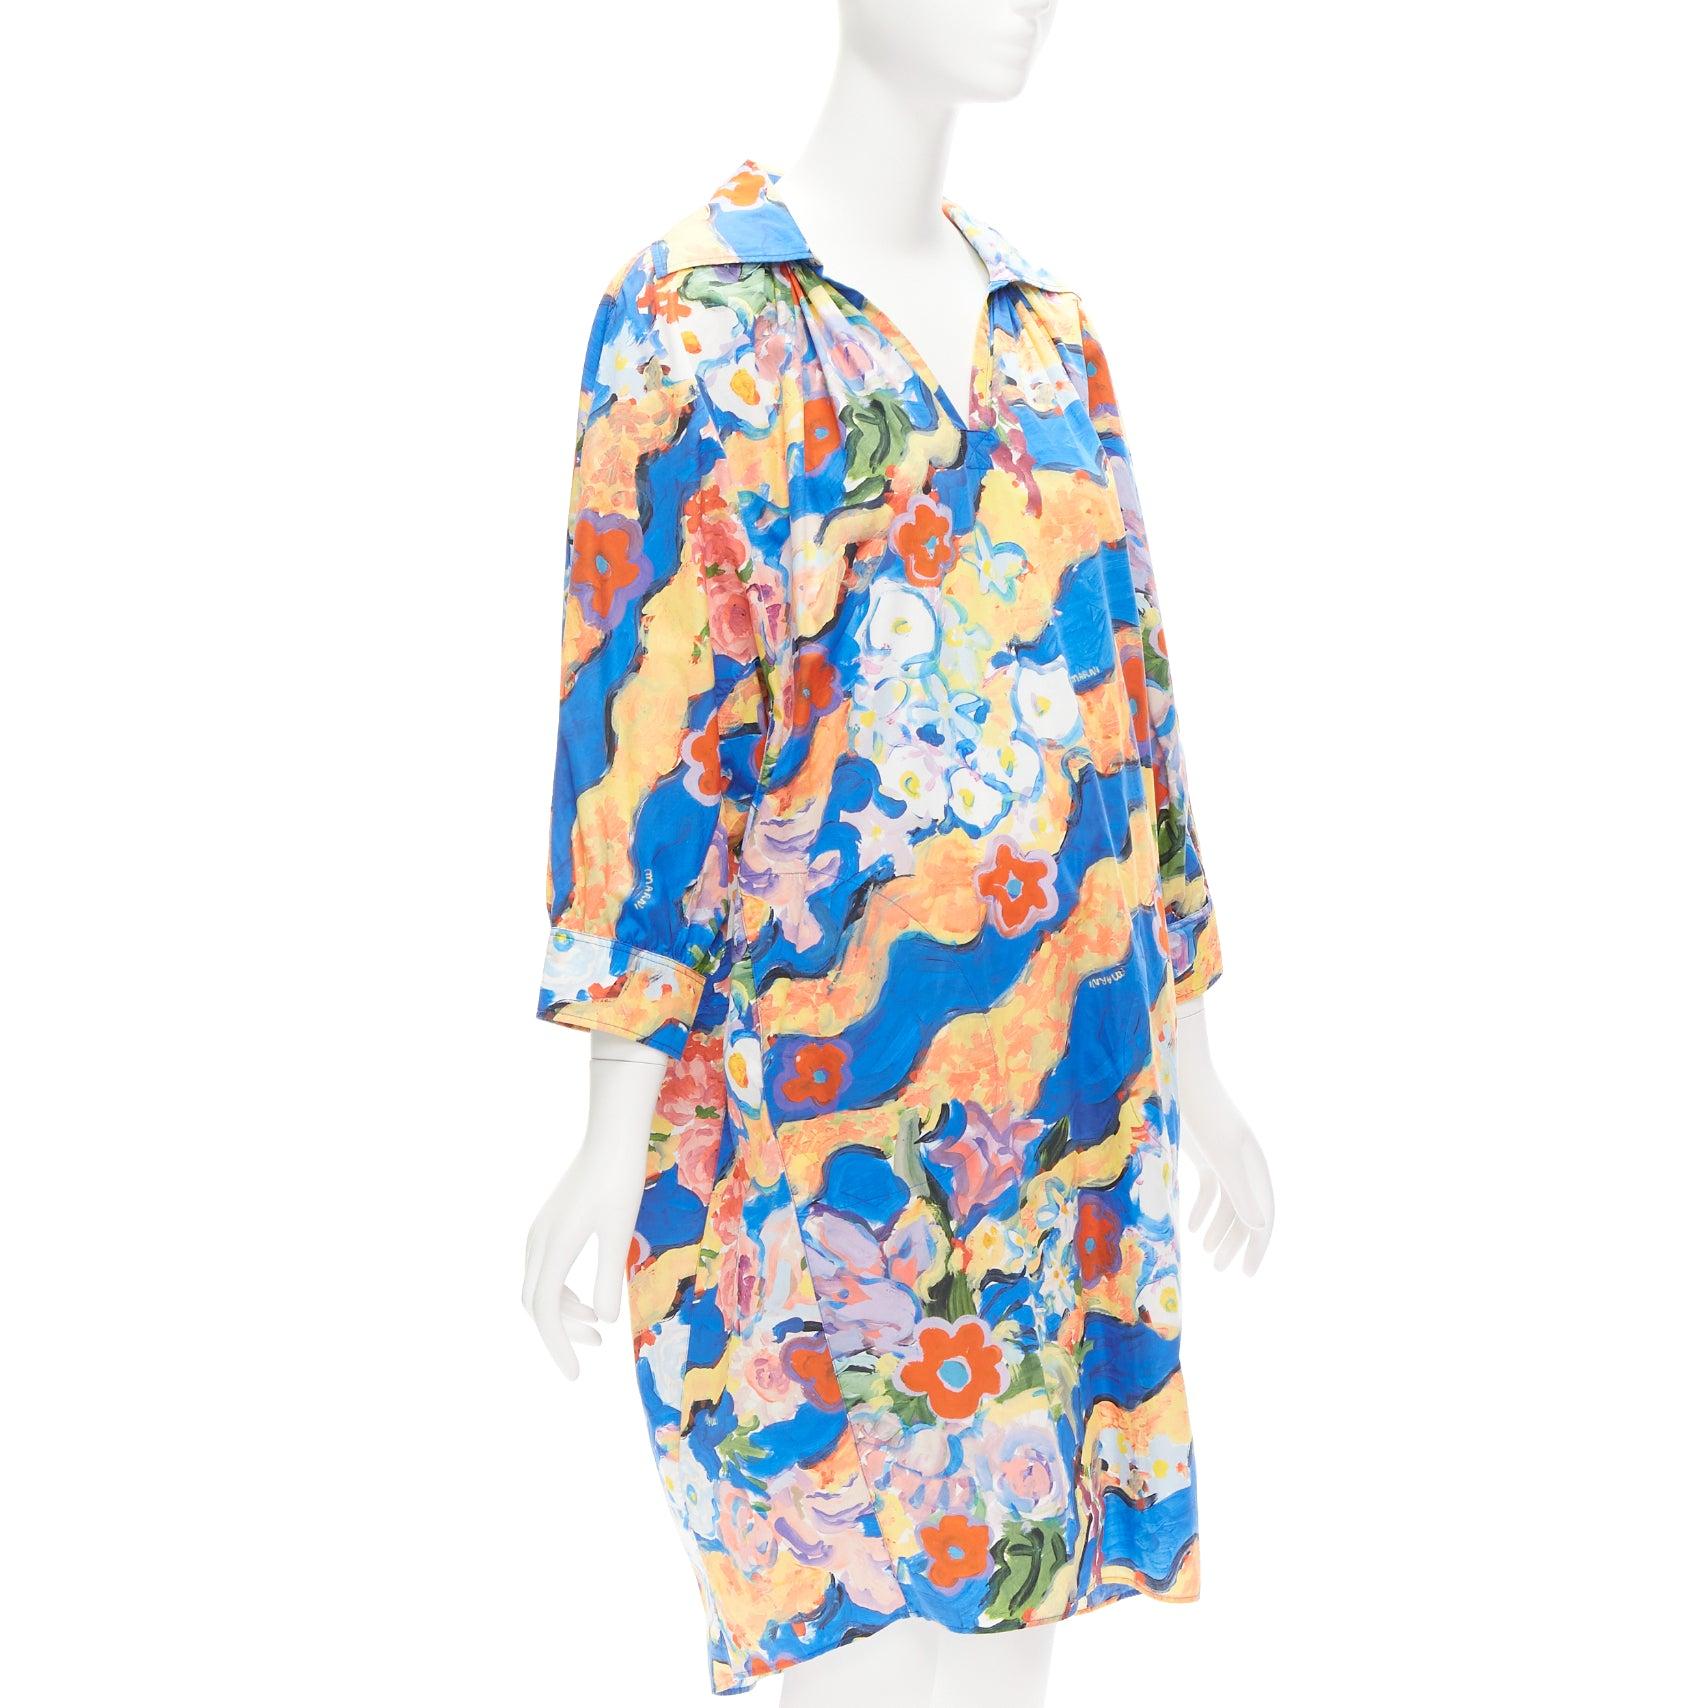 MARNI Flaminia Veronesi 2022 multicolour floral paint batwing dress IT36 XS
Reference: CELG/A00300
Brand: Marni
Collection: 2022 Flaminia Veronesi
Material: Cotton
Color: Multicolour
Pattern: Floral
Closure: Slip On
Extra Details: Batwing